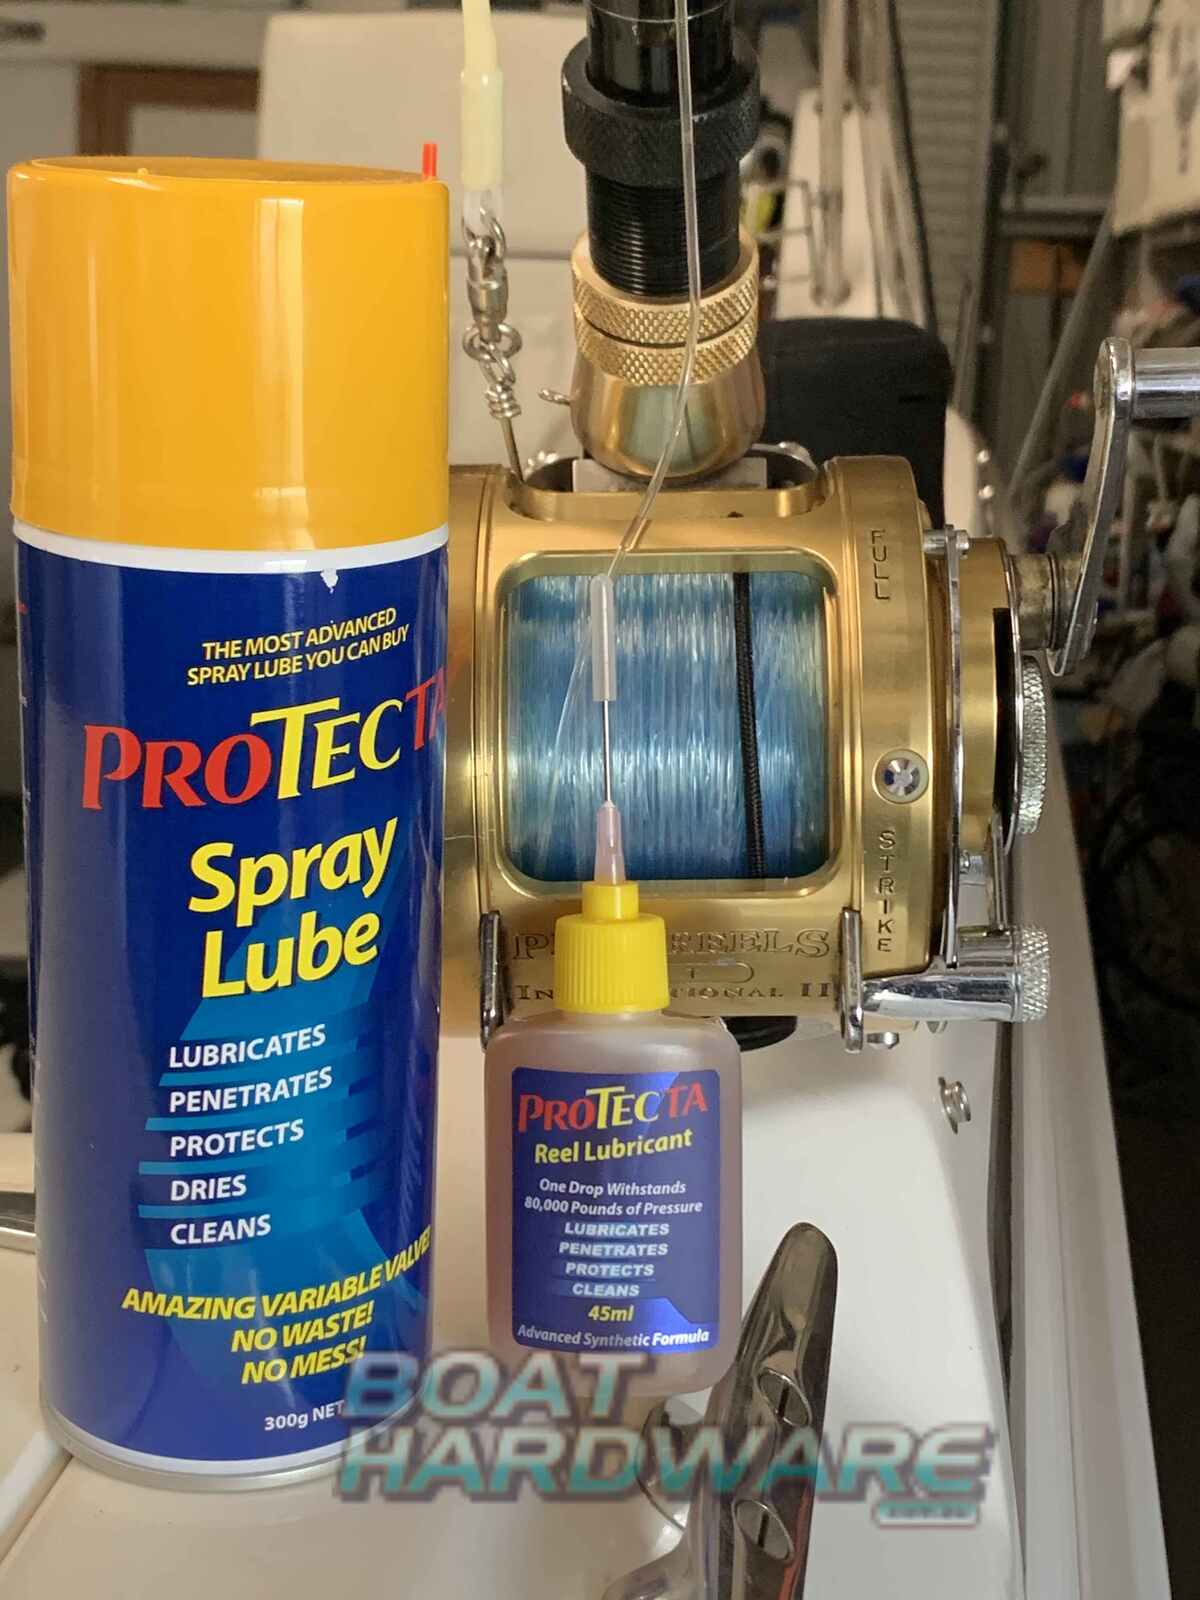 ProTecta Spray Lube & Reel Lubricant Pack Protecta